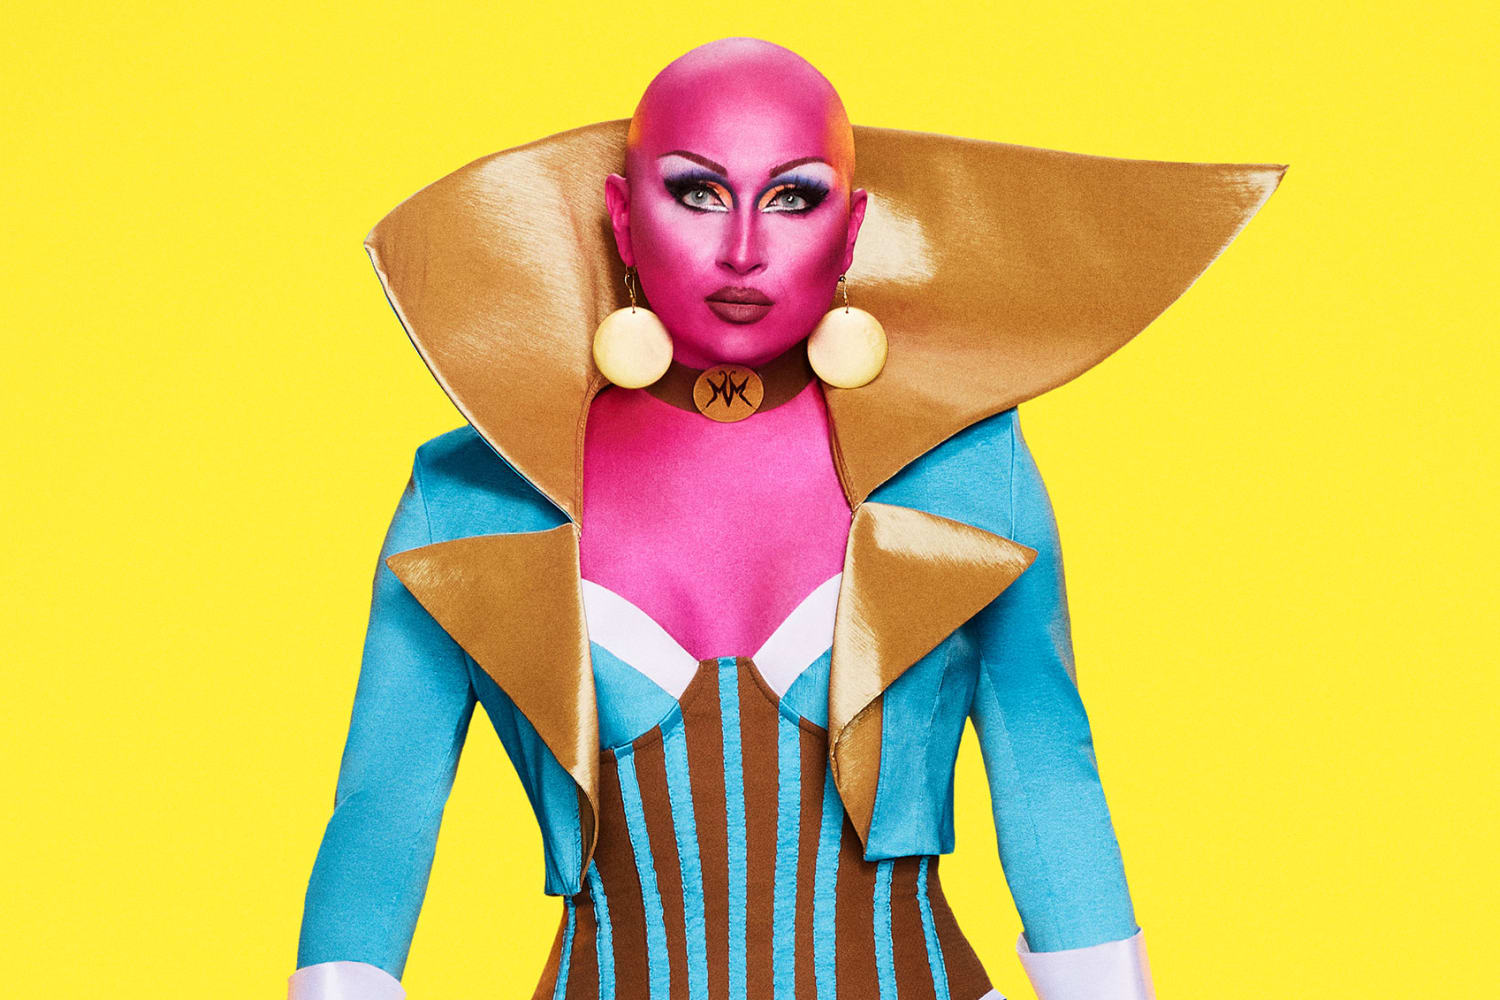 ‘Her-story’ or ‘his-story’? First straight man on ‘RuPaul’s Drag Race’ ignites casting debate